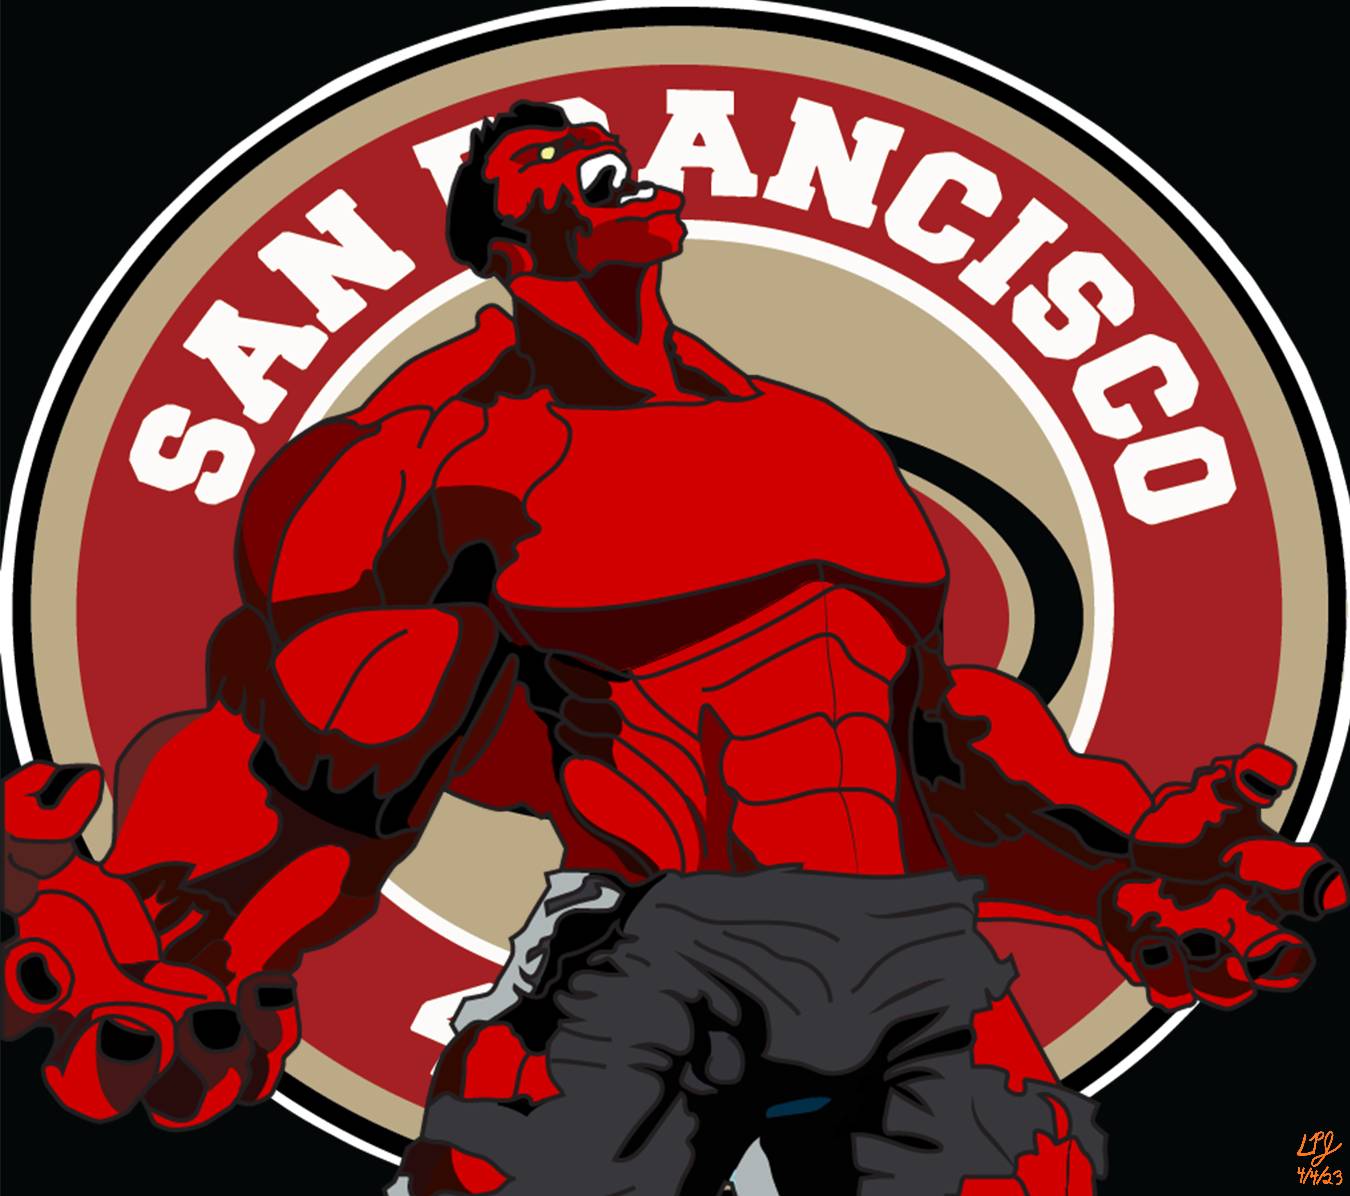 49ers Vector Graphic by AnansiOneiros on DeviantArt